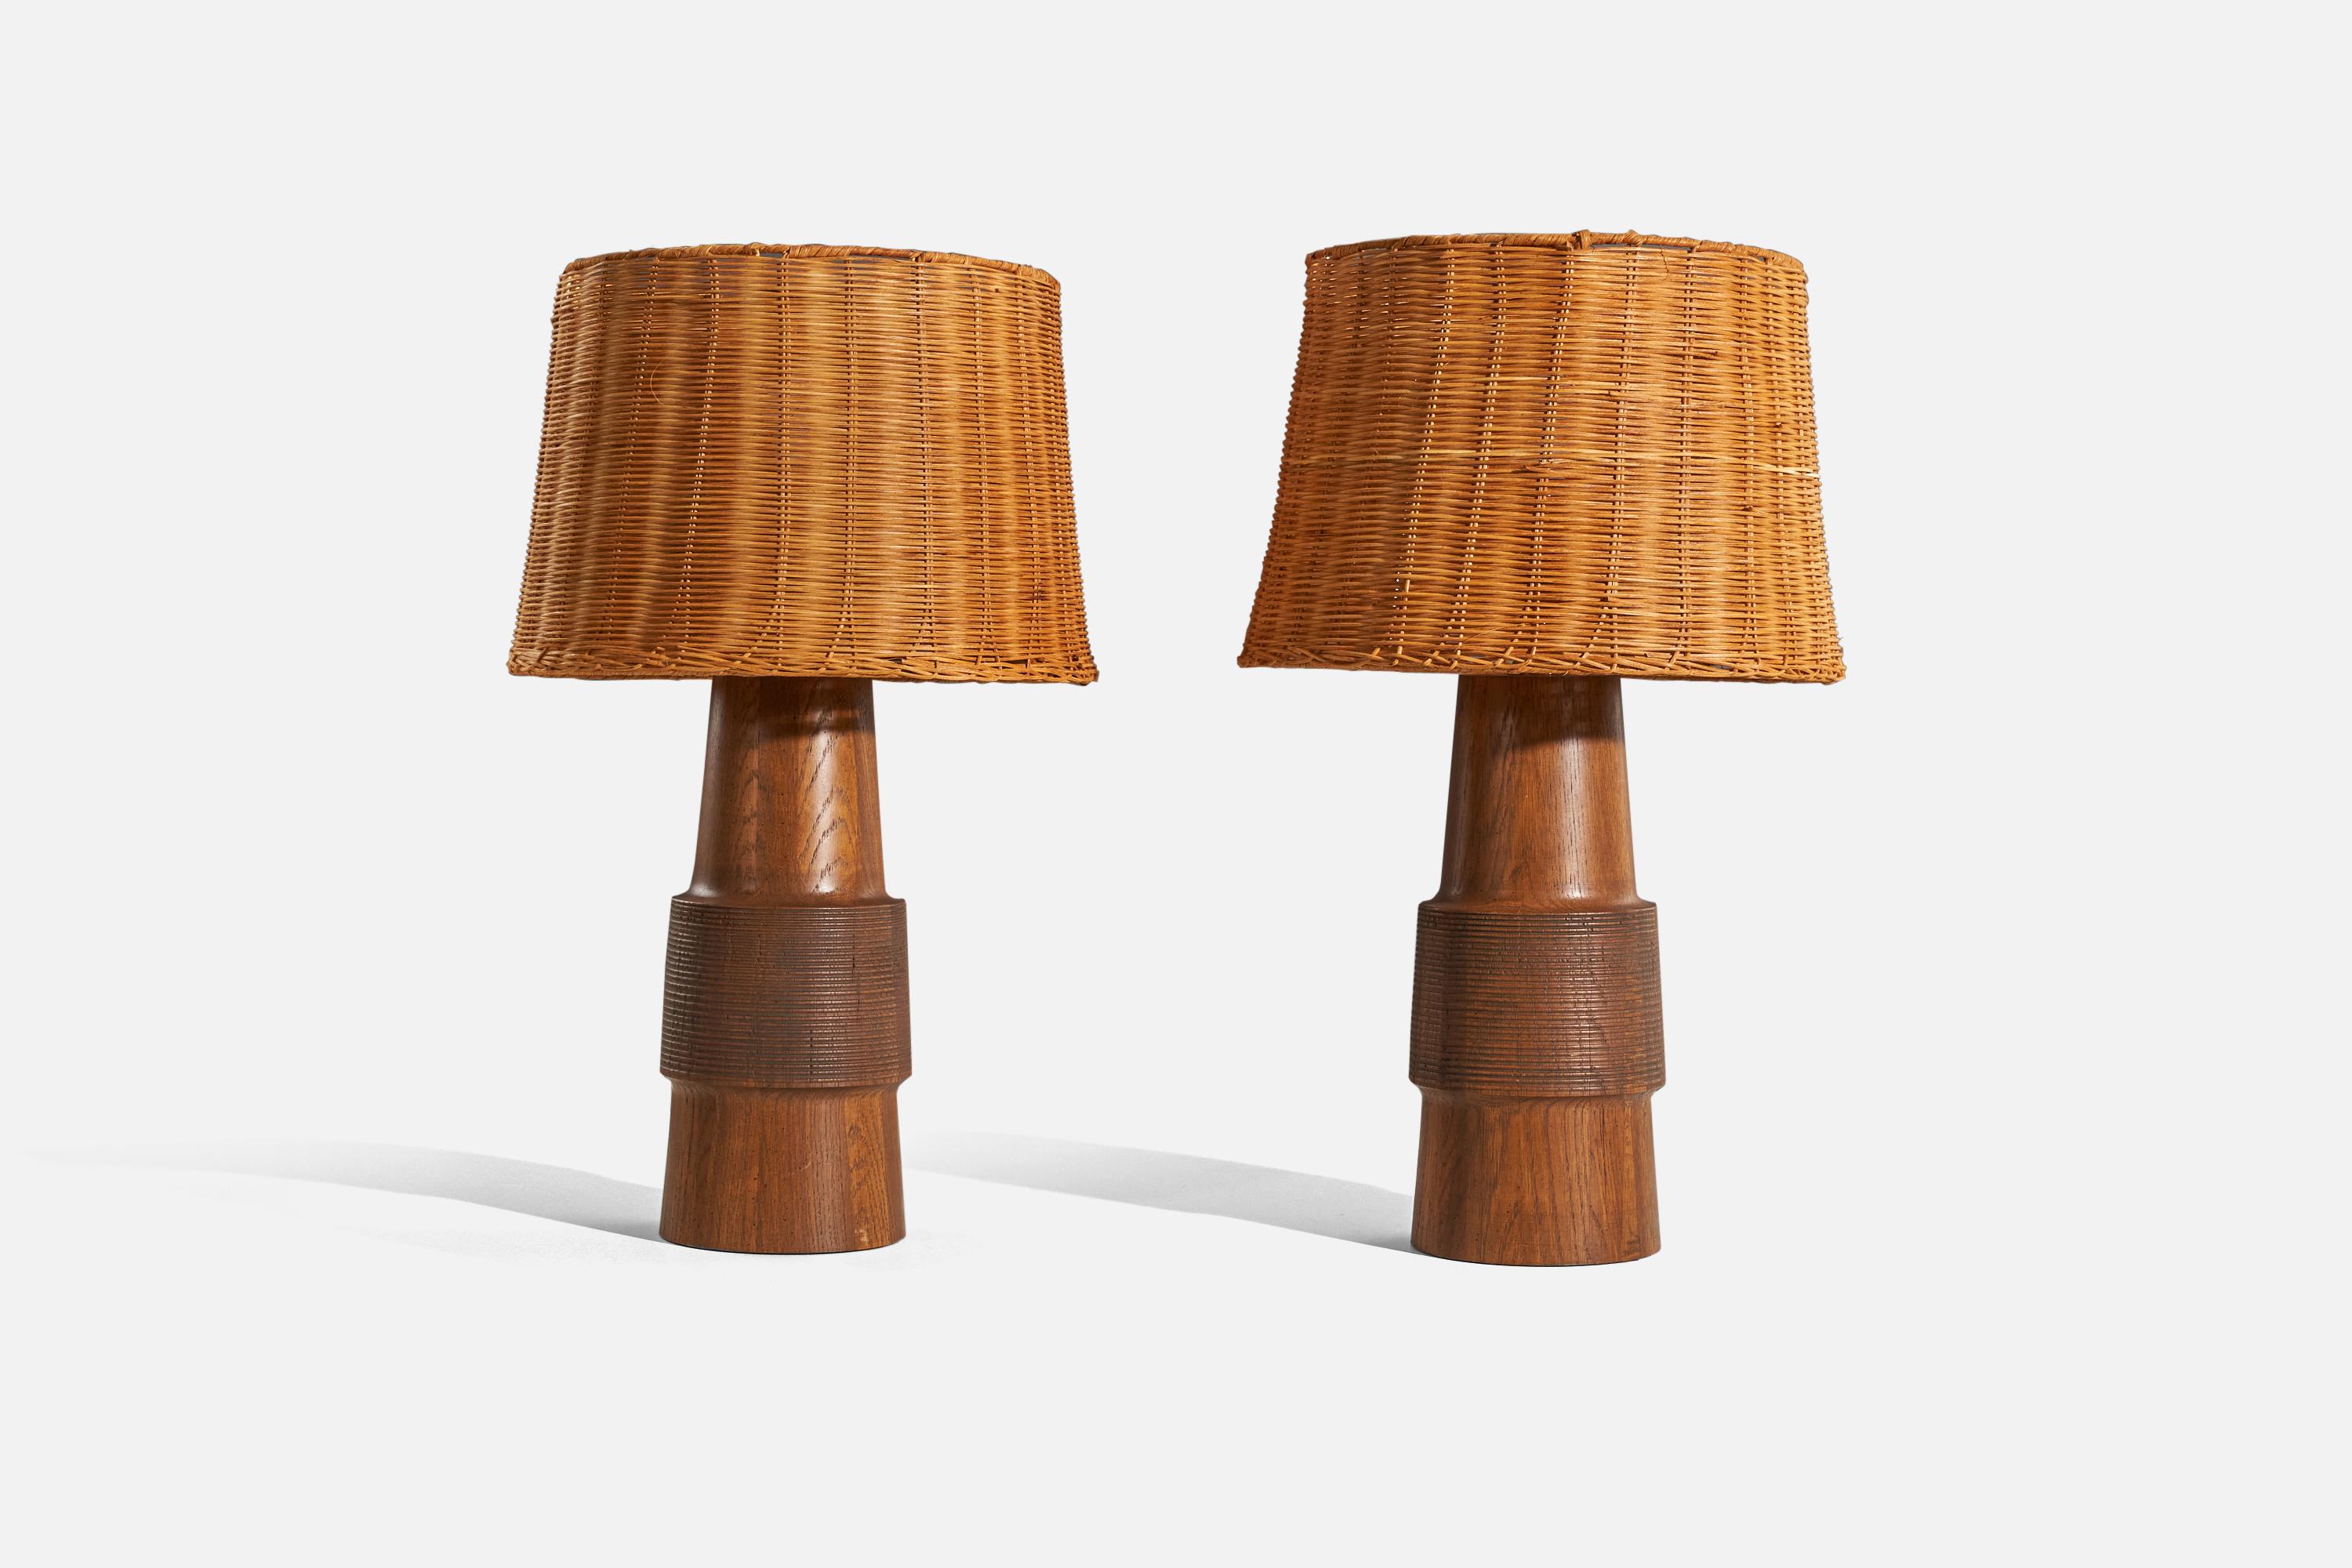 A pair of oak table lamps designed and produced in the United States, 1950s.

Sold without lampshade. 
Dimensions of Lamp (inches) : 21.25 x 7.25 x 7.25 (H x W x D)
Dimensions of Shade (inches) : 13.6875 x 16.25 x 11.5 (T x B x S)
Dimension of Lamp